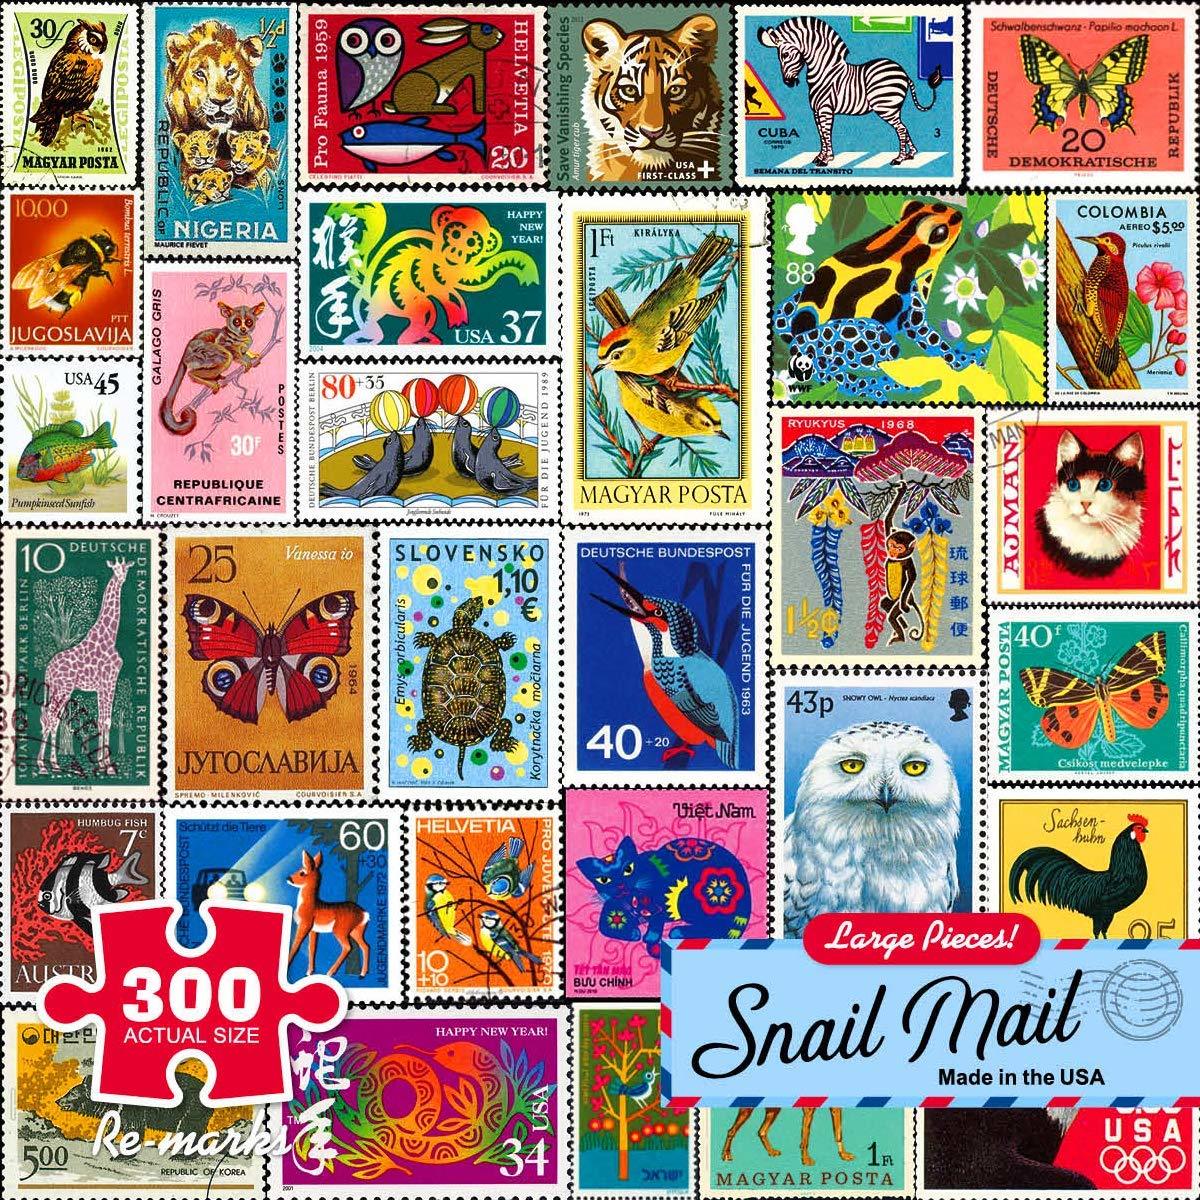 Snail Mail - 300pc Large Format Jigsaw Puzzle By Re-marks  			  					NEW